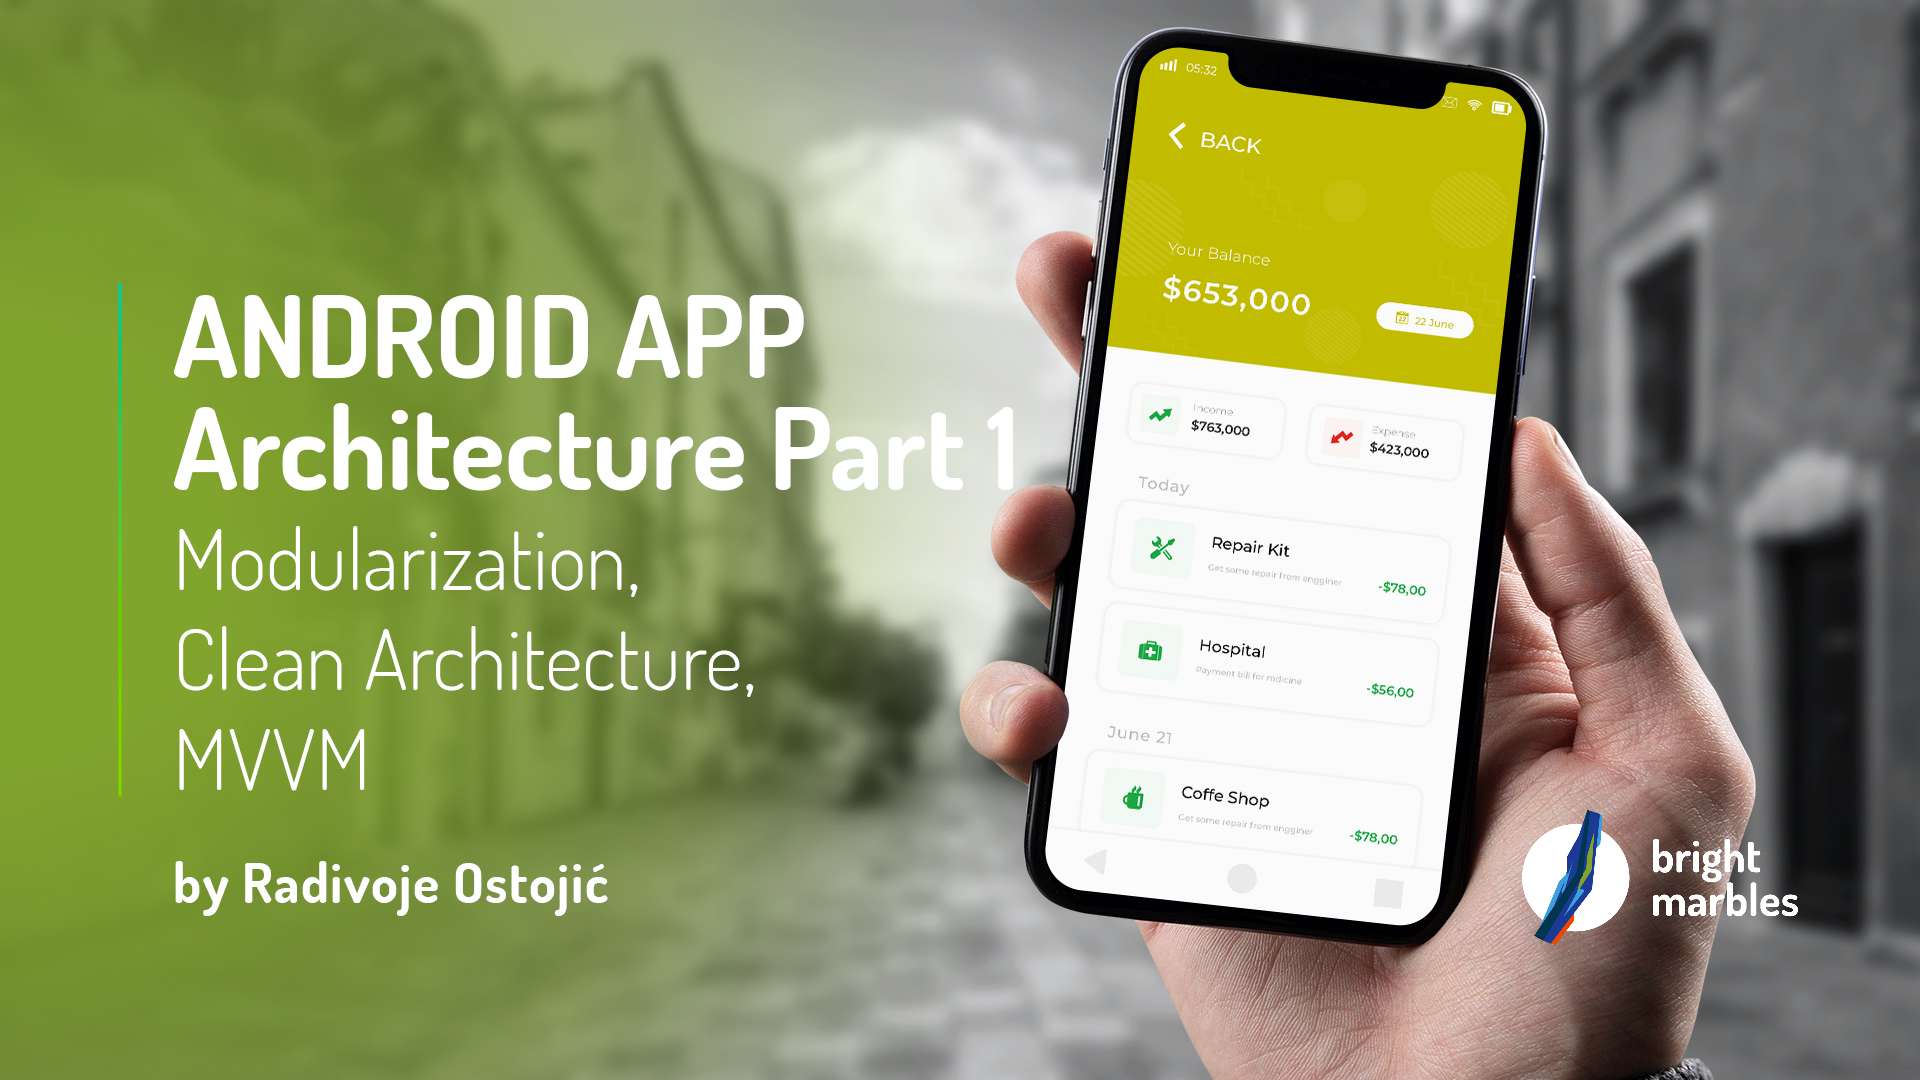 Android app architecture part 1